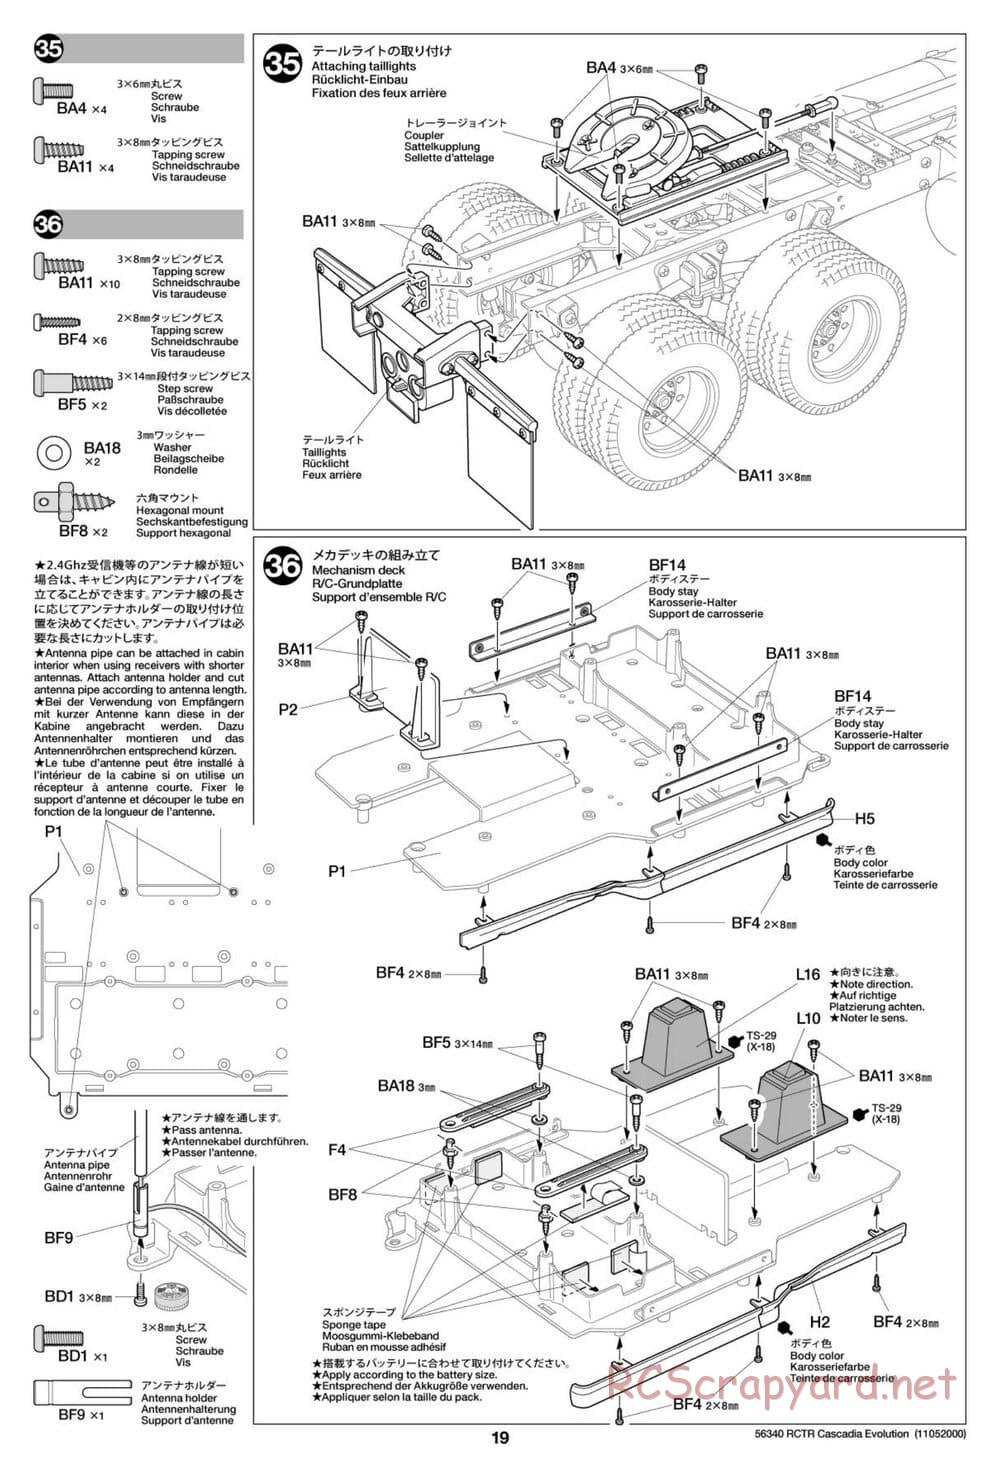 Tamiya - Freightliner Cascadia Evolution Tractor Truck Chassis - Manual - Page 19